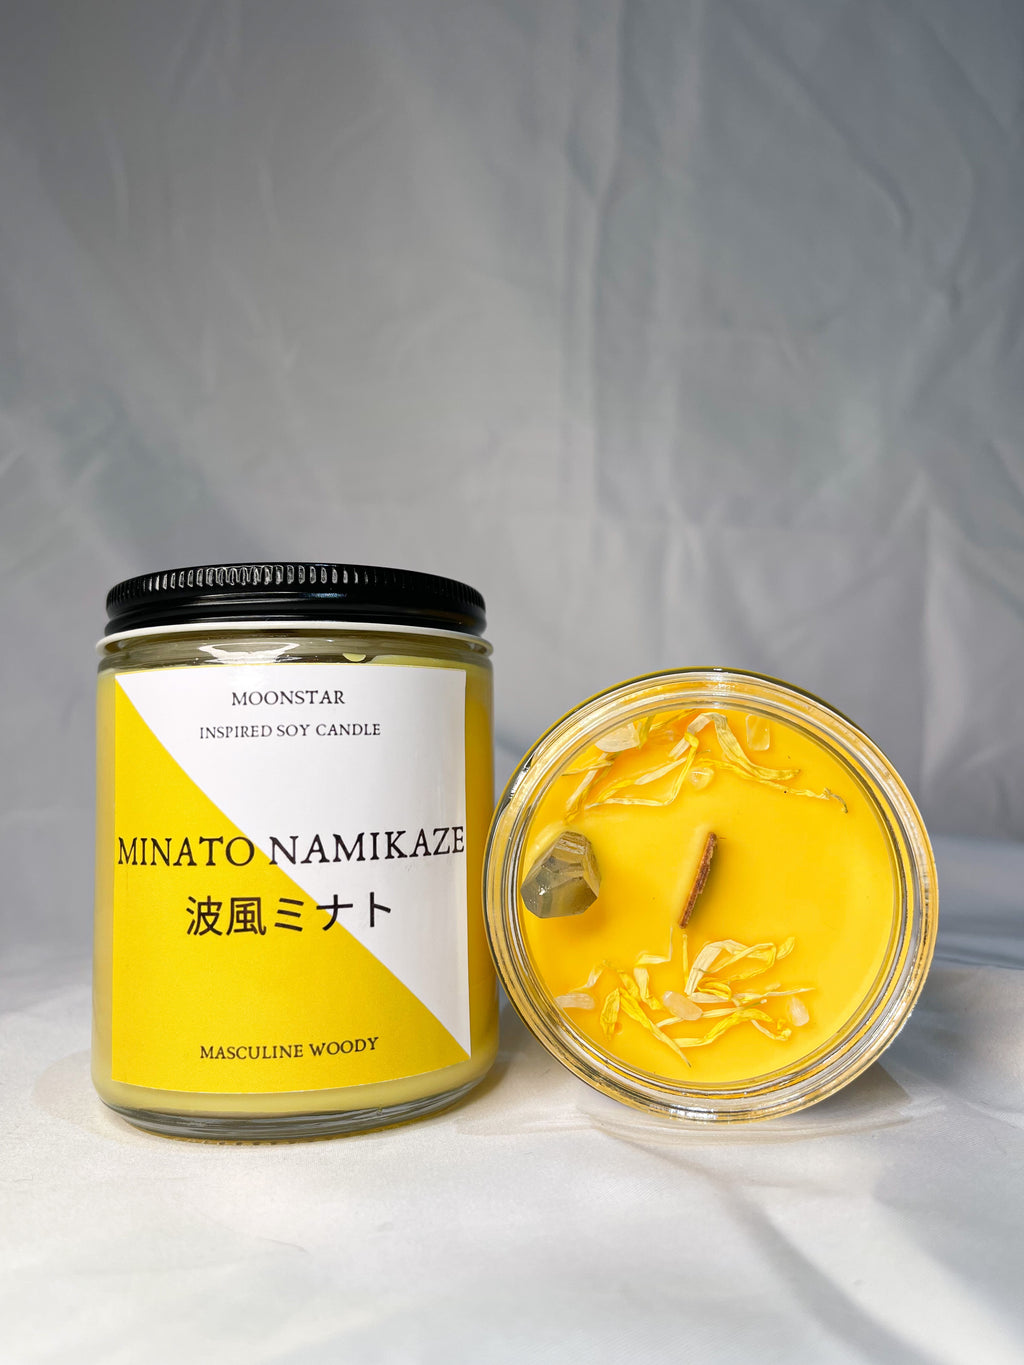 Minato inspired candle